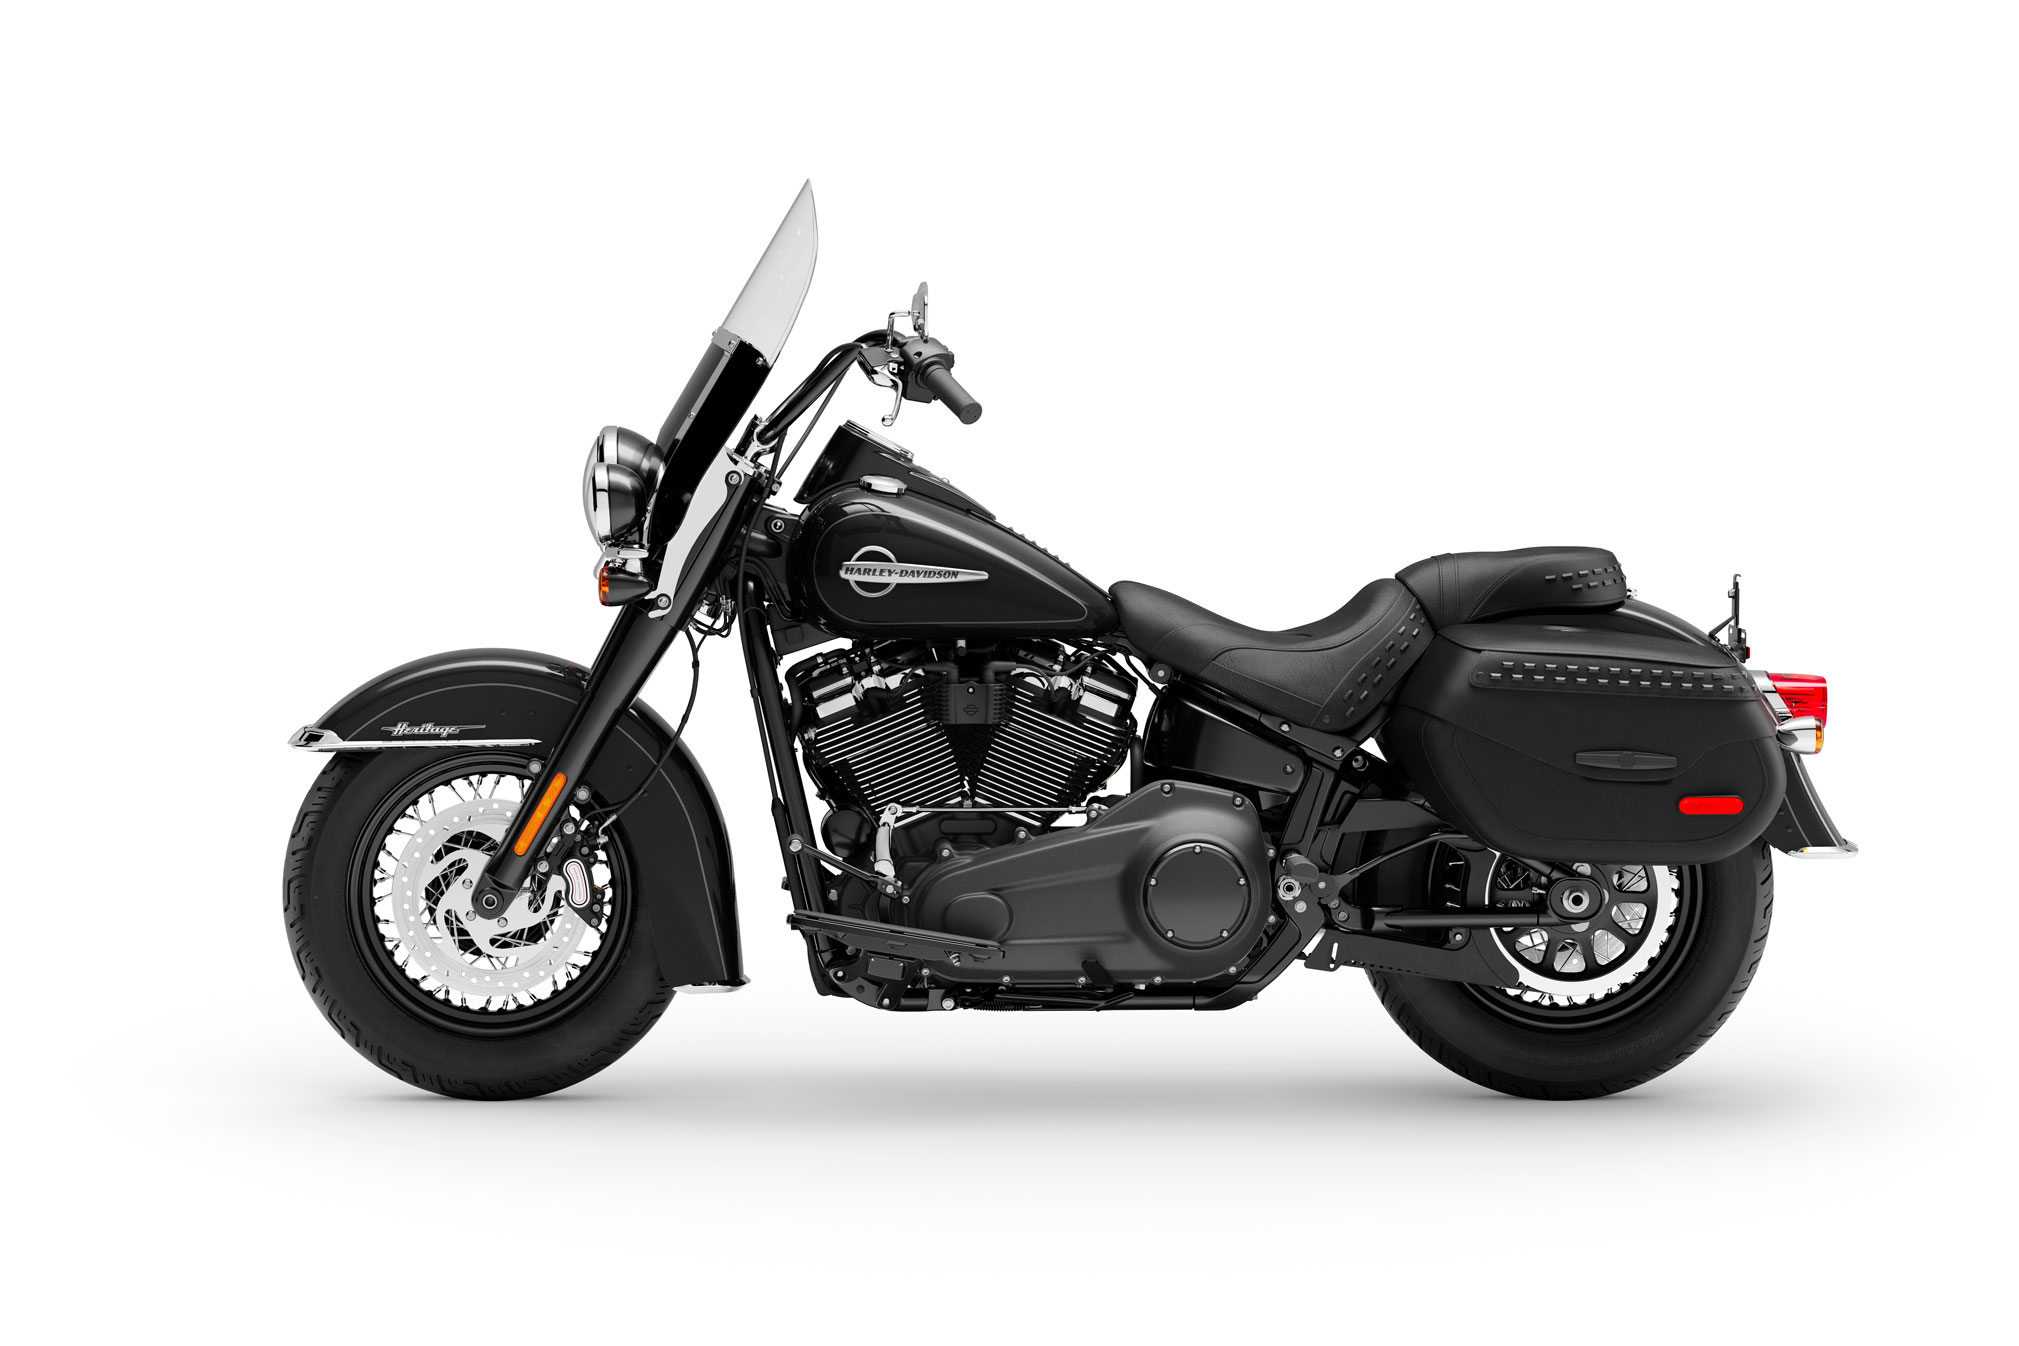 2019 Harley Davidson Heritage Classic Guide Total Motorcycle